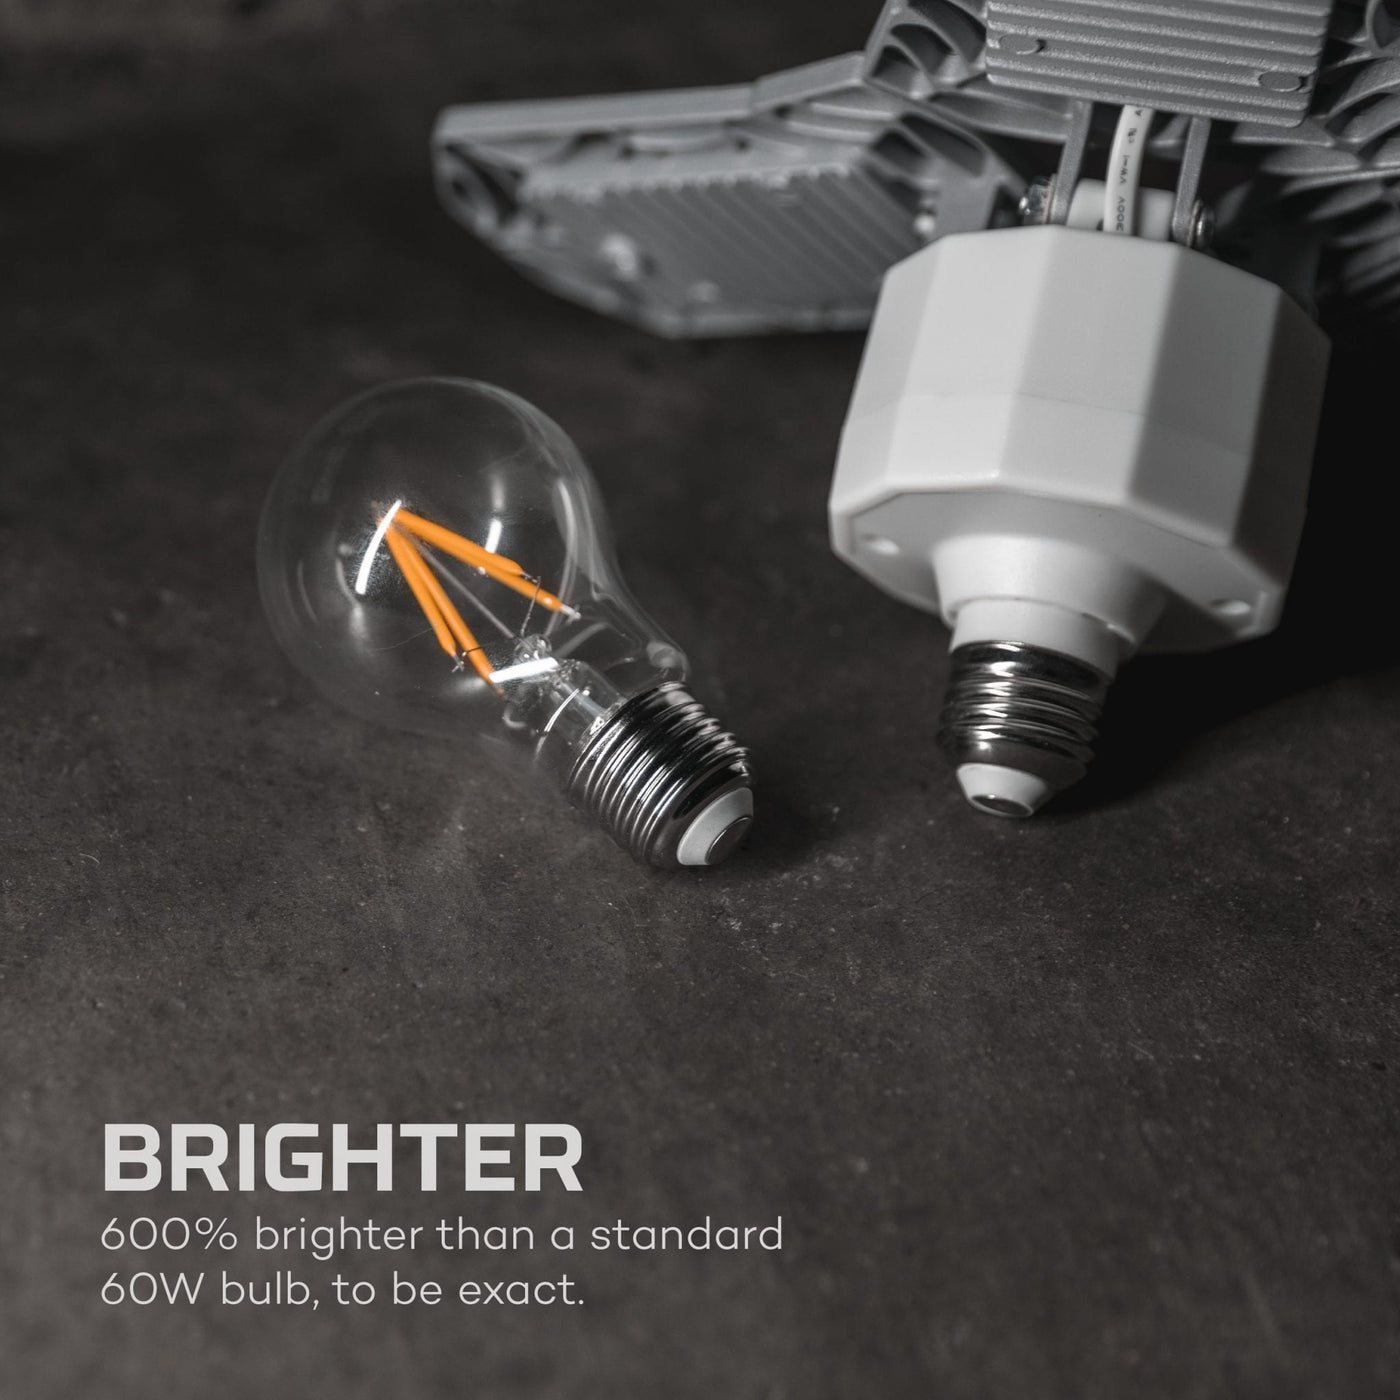 At Nebo Tools, we continually innovate so that we can offer the highest quality LED lighting products at the best price. The NEBO HIGH BRIGHT 6,000 is a powerfully bright, 6,000 lumen light that fits in any standard non-recessed light socket.